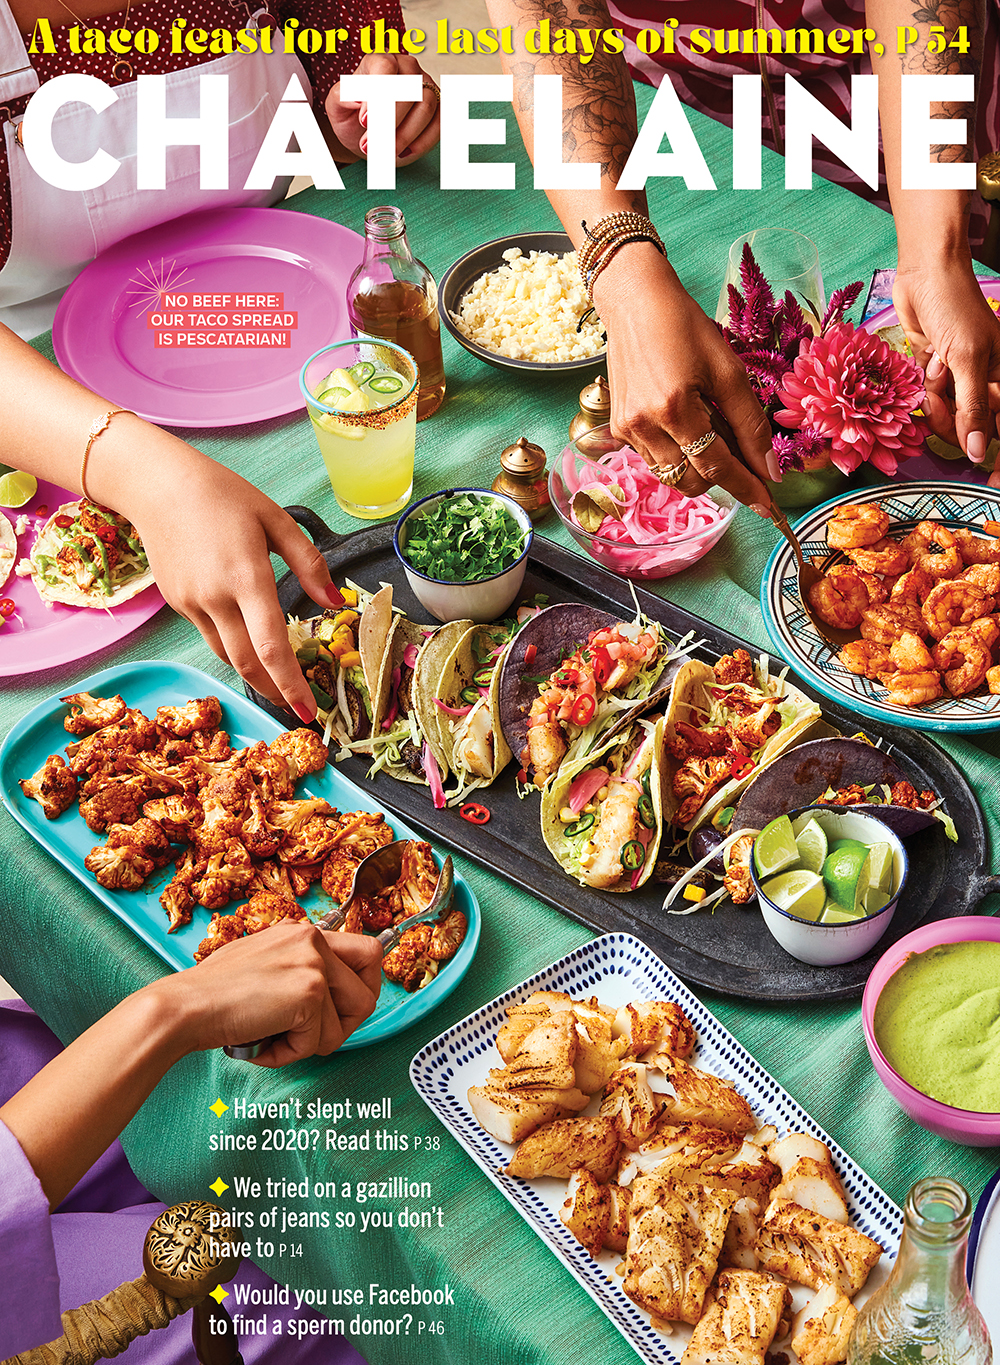 The cover of the September 2022 issue of Chatelaine, depicting a table set with a taco feast and spicy margaritas, with hands reaching in to serve themselves